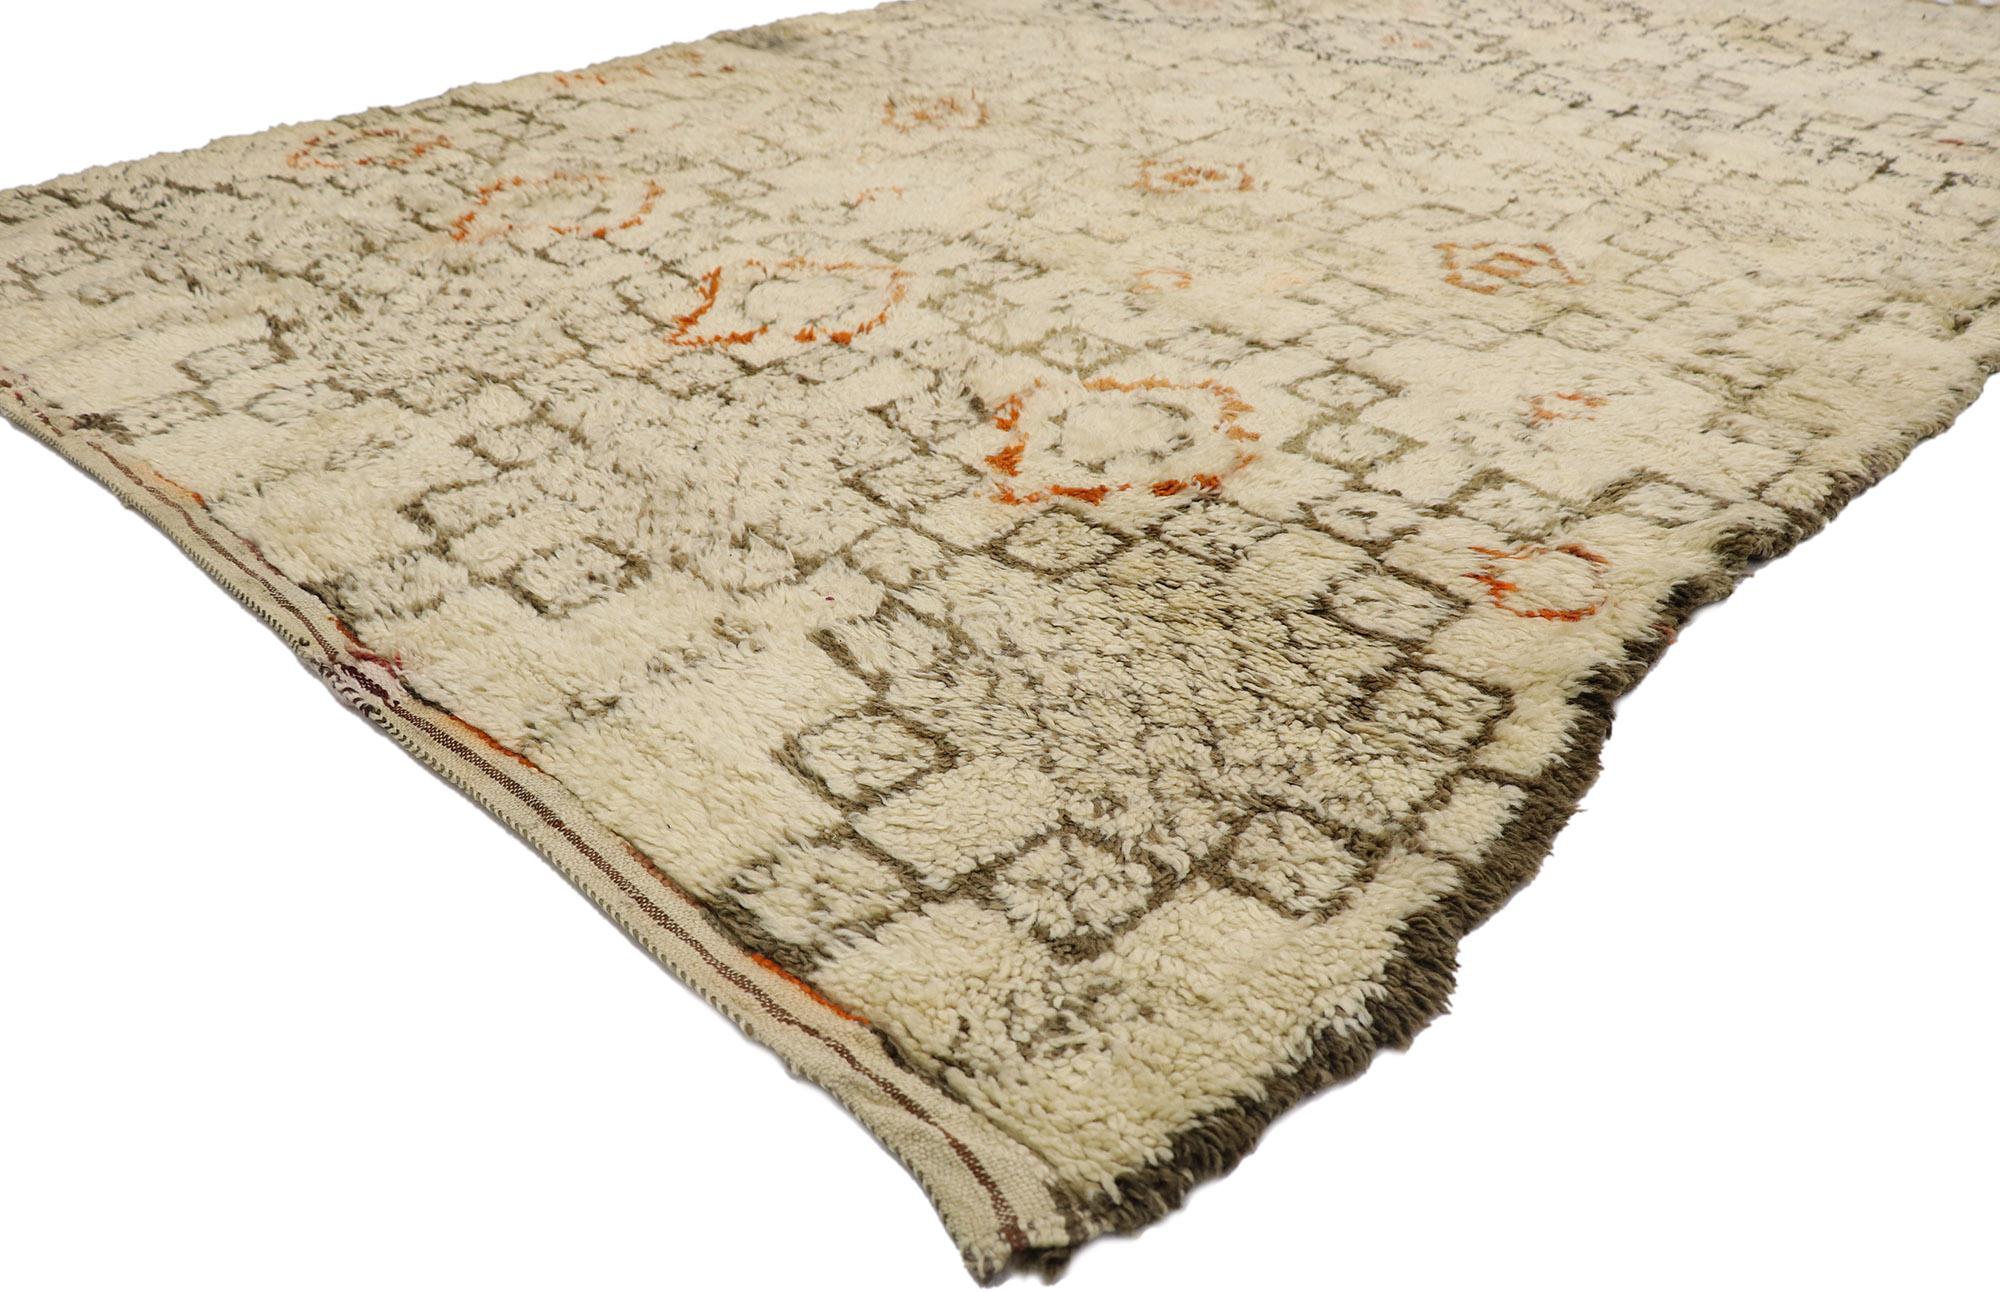 21416 Vintage Beni Ourain Moroccan Rug, 06'05 x 11'00.
Nomadic charm meets global chic in this hand knotted wool vintage Beni Ourain Moroccan rug. The meticulously detailed tribal design and earthy colorway woven into this piece work together